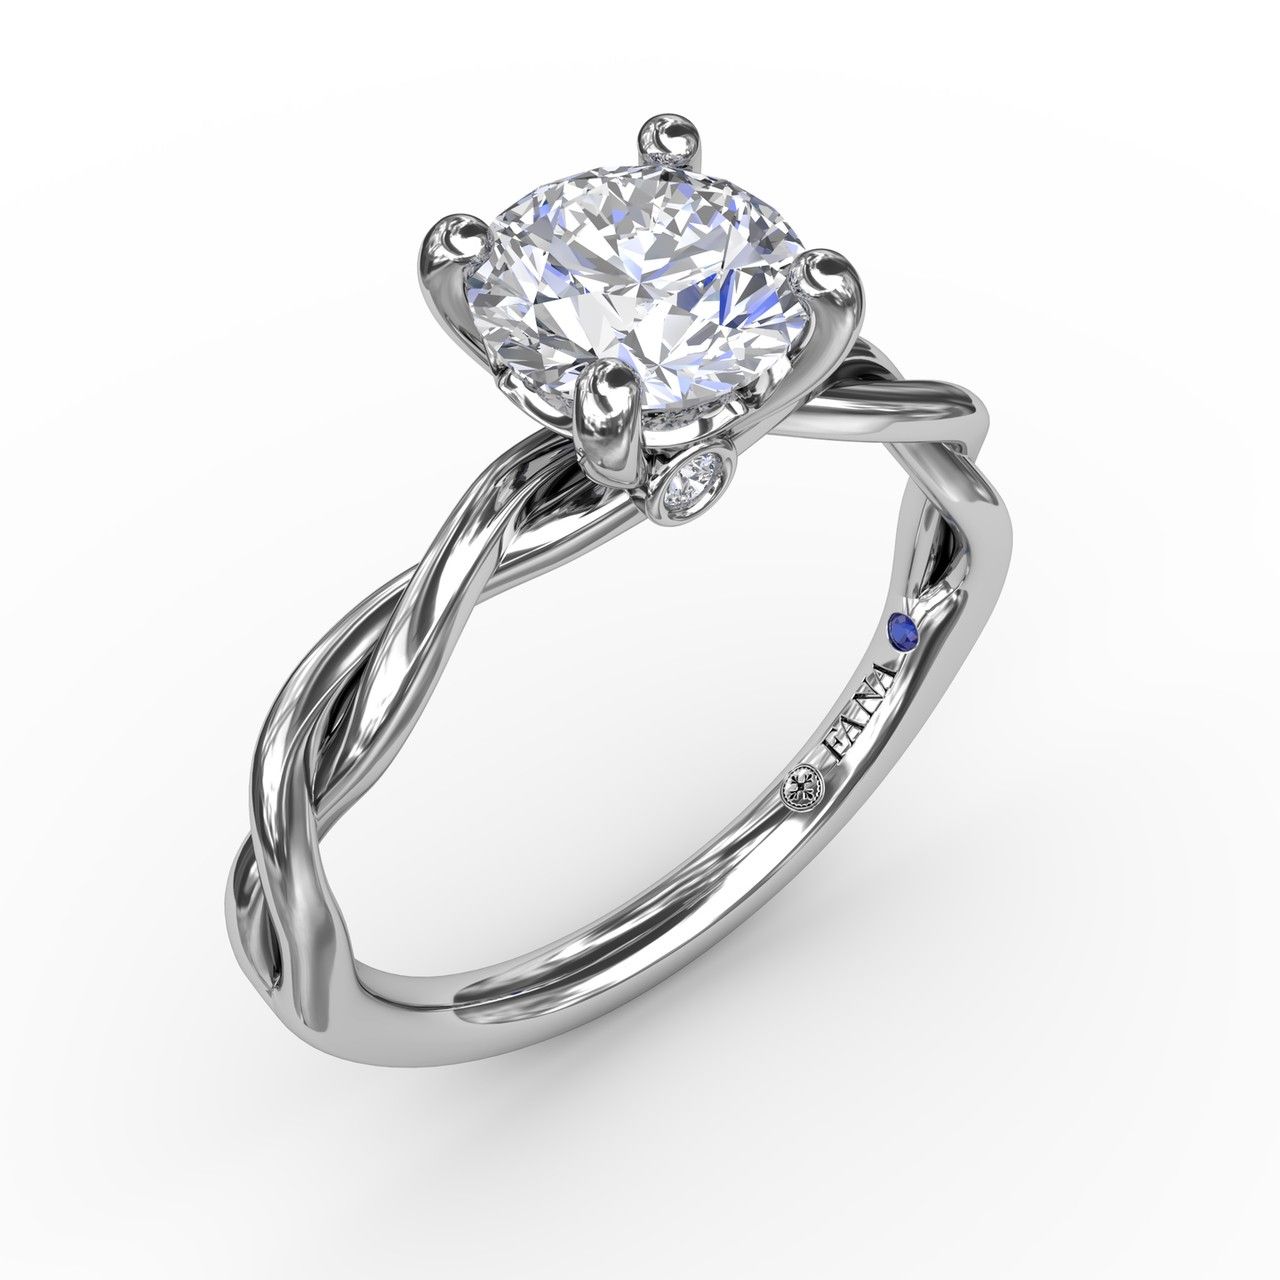 14K WHITE GOLD TWIST SEMI-MOUNT RING SIZE 6.5 WITH 2=0.02TW ROUND G-H VS2-SI1 DIAMONDS AND ONE ROUND BLUE SAPPHIRE   (2.90 GRAMS)